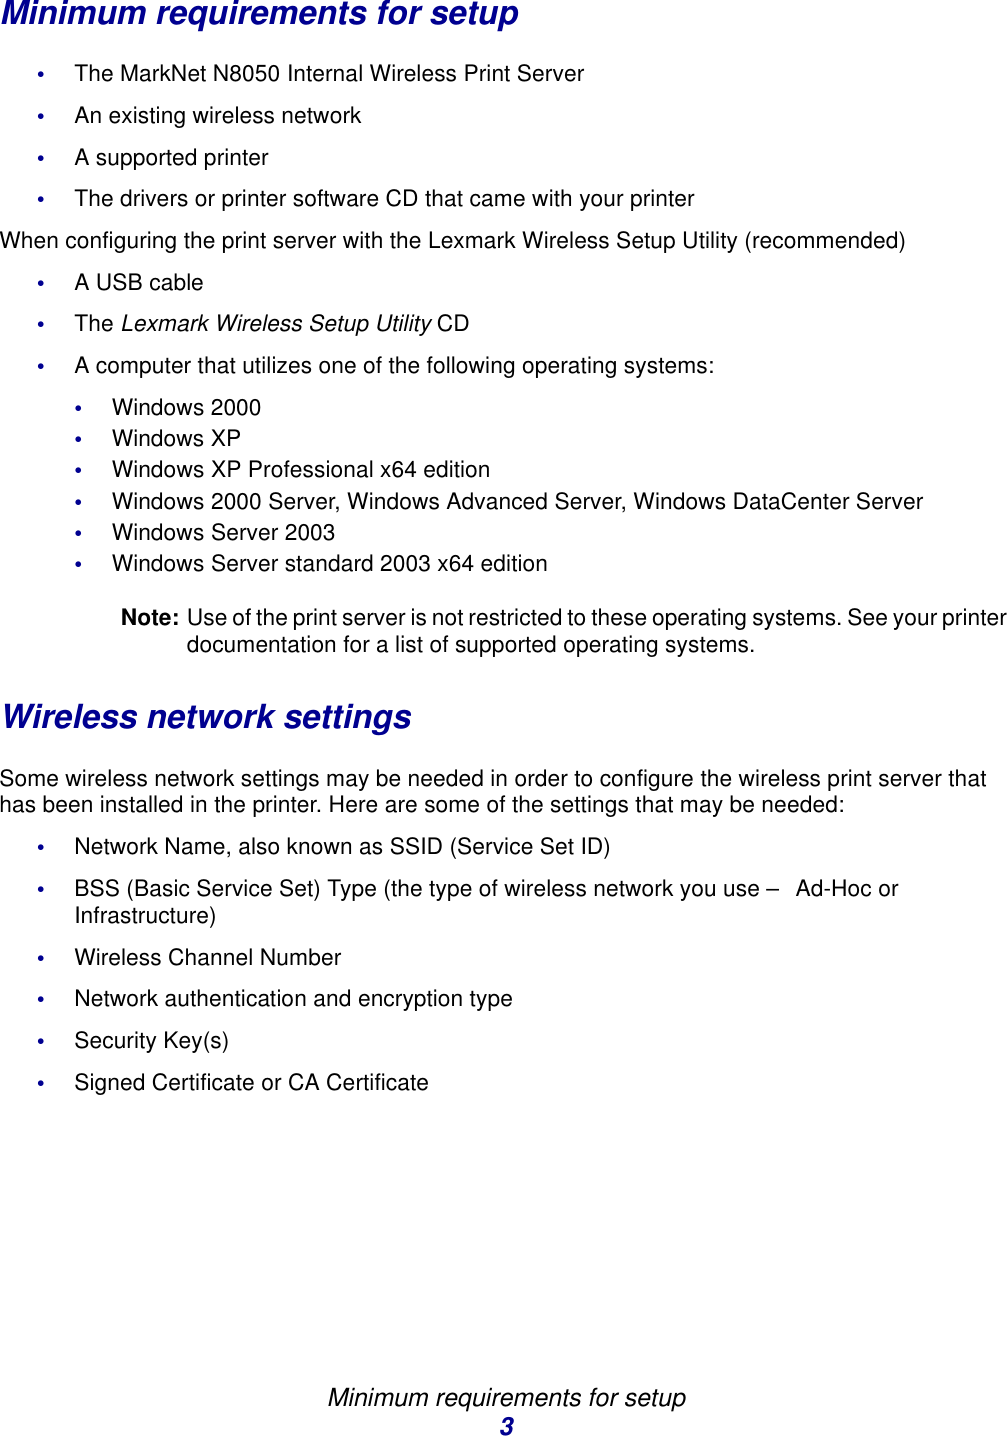 Minimum requirements for setup3Minimum requirements for setup•The MarkNet N8050 Internal Wireless Print Server•An existing wireless network •A supported printer•The drivers or printer software CD that came with your printerWhen configuring the print server with the Lexmark Wireless Setup Utility (recommended)•A USB cable •The Lexmark Wireless Setup Utility CD•A computer that utilizes one of the following operating systems:•Windows 2000•Windows XP•Windows XP Professional x64 edition•Windows 2000 Server, Windows Advanced Server, Windows DataCenter Server•Windows Server 2003•Windows Server standard 2003 x64 editionNote: Use of the print server is not restricted to these operating systems. See your printer documentation for a list of supported operating systems. Wireless network settingsSome wireless network settings may be needed in order to configure the wireless print server that has been installed in the printer. Here are some of the settings that may be needed:•Network Name, also known as SSID (Service Set ID)•BSS (Basic Service Set) Type (the type of wireless network you use – Ad-Hoc or Infrastructure) •Wireless Channel Number•Network authentication and encryption type•Security Key(s)•Signed Certificate or CA Certificate